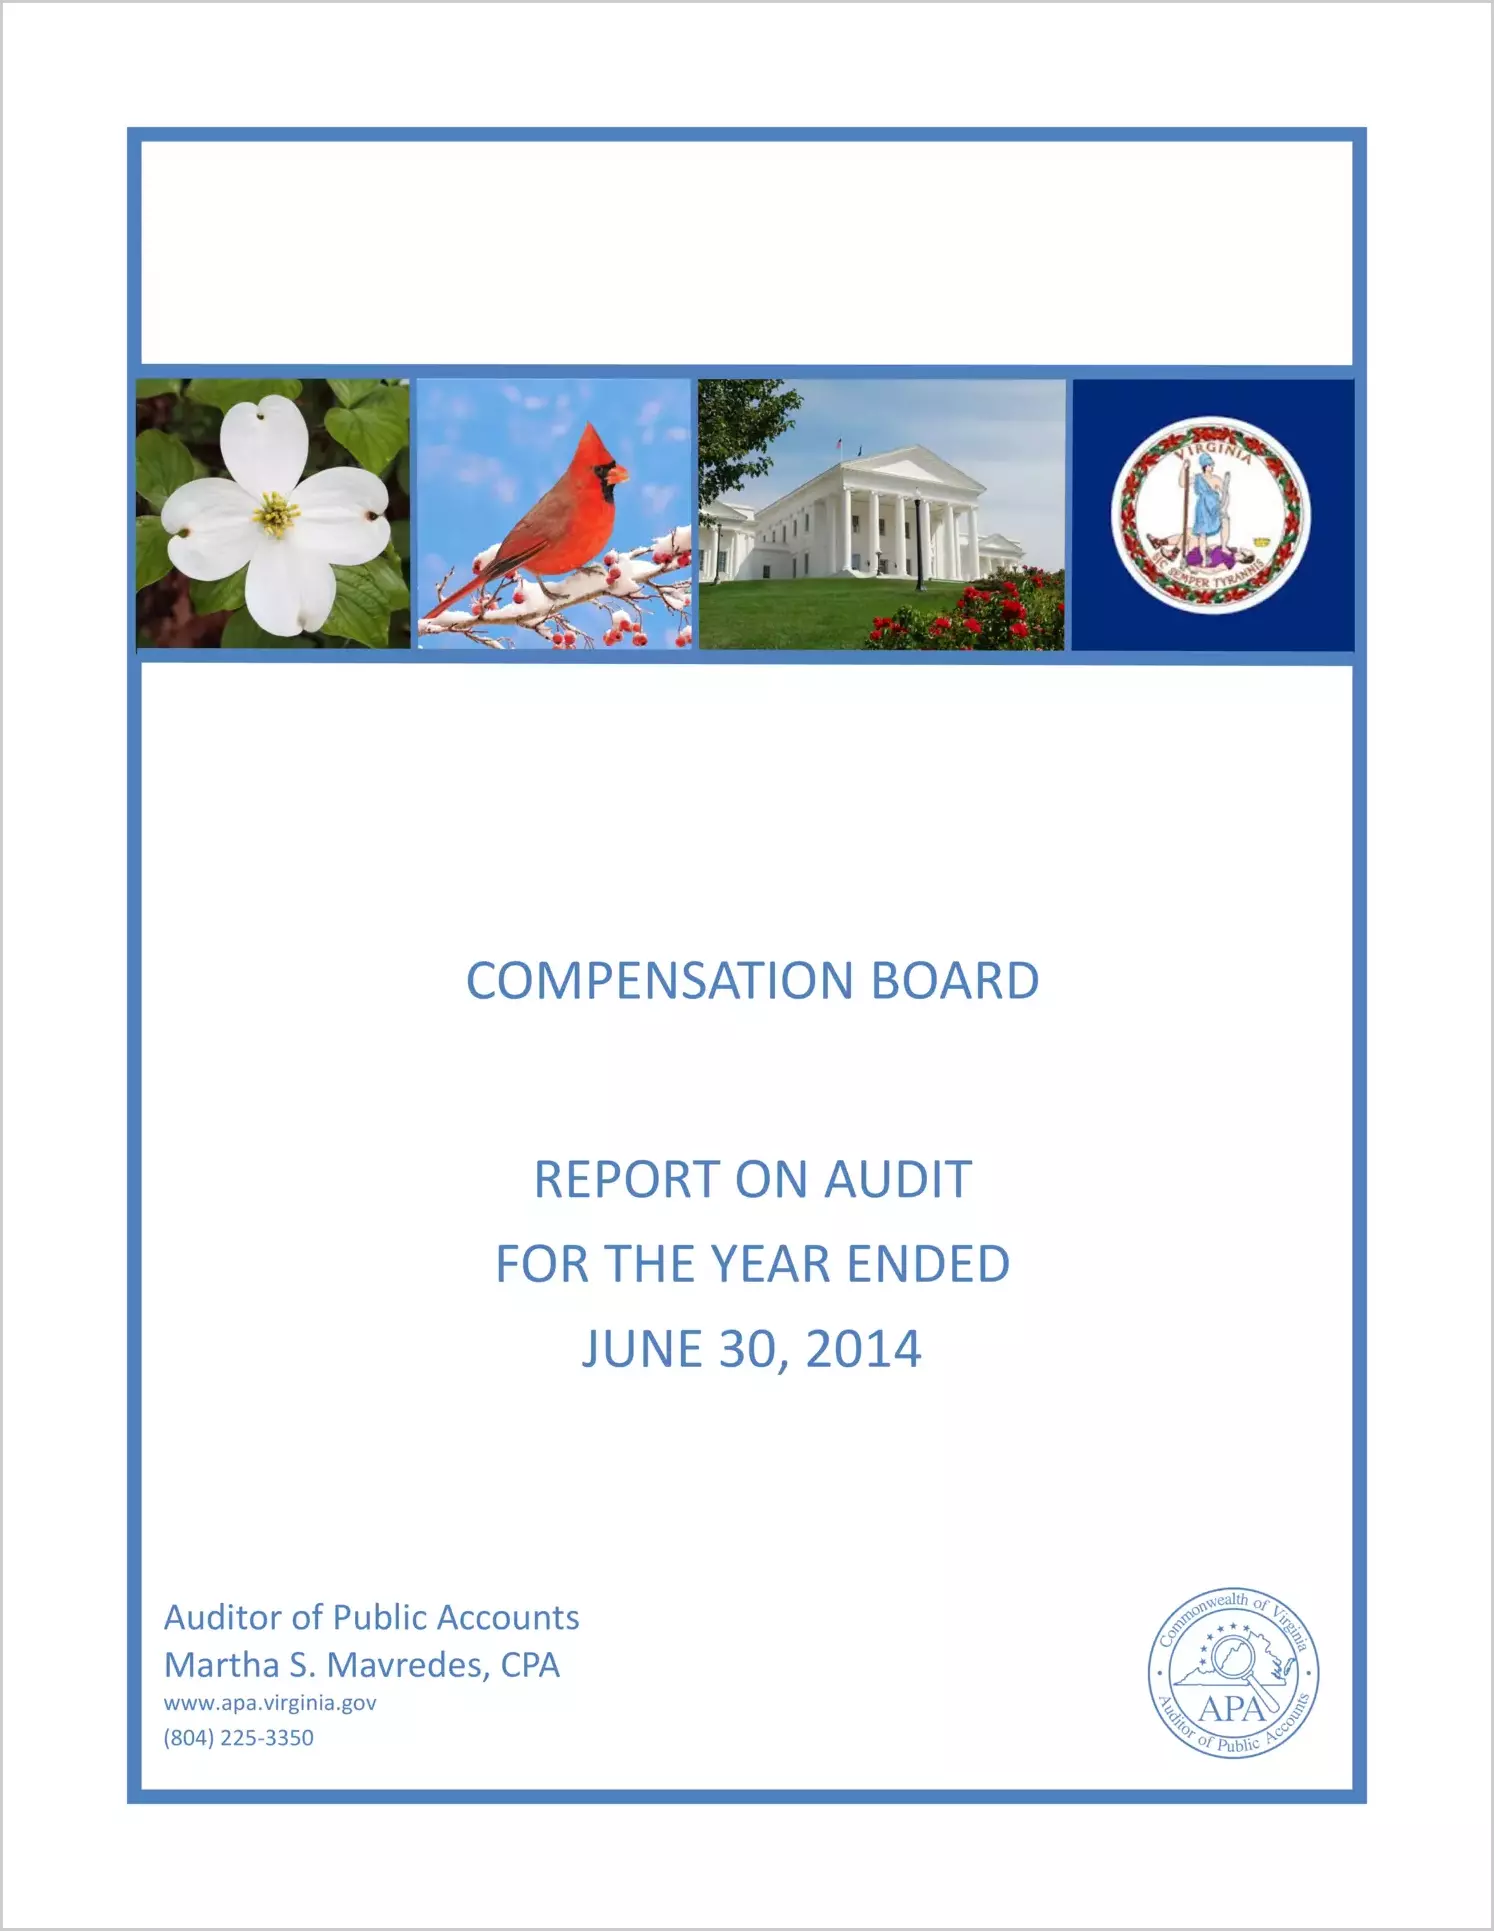 Compensation Board Report on Audit for the fiscal year ended June 30, 2014